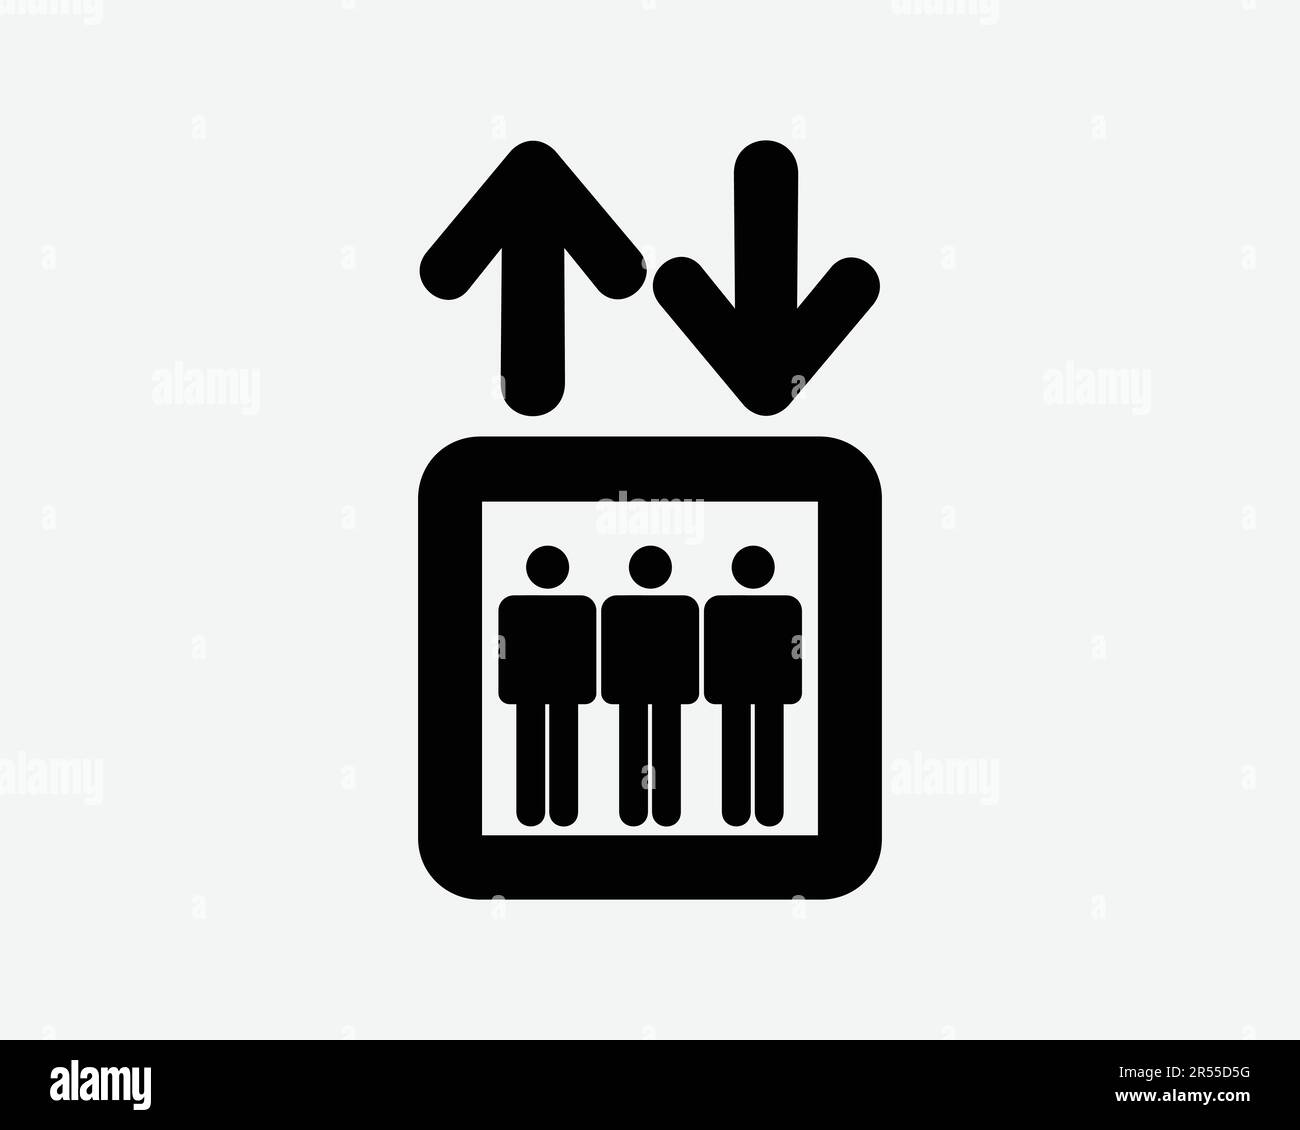 Elevator Icon. Lift Arrow Up Down Person People Building Lobby Information Signage Sign Symbol Black Artwork Graphic Illustration Clipart EPS Vector Stock Vector